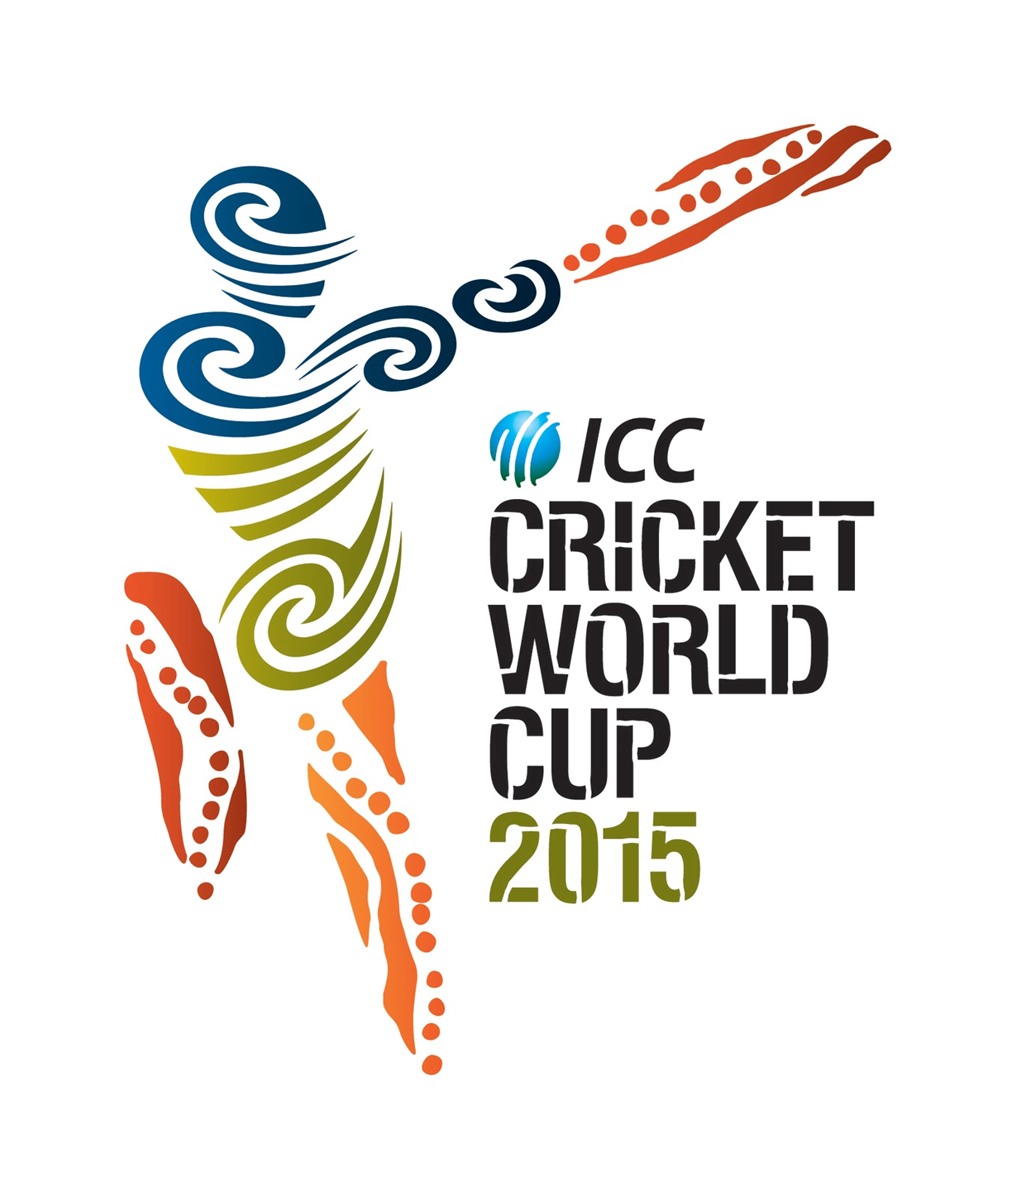 Homestay Network helps with accommodation for the Cricket World Cup #CWC2015